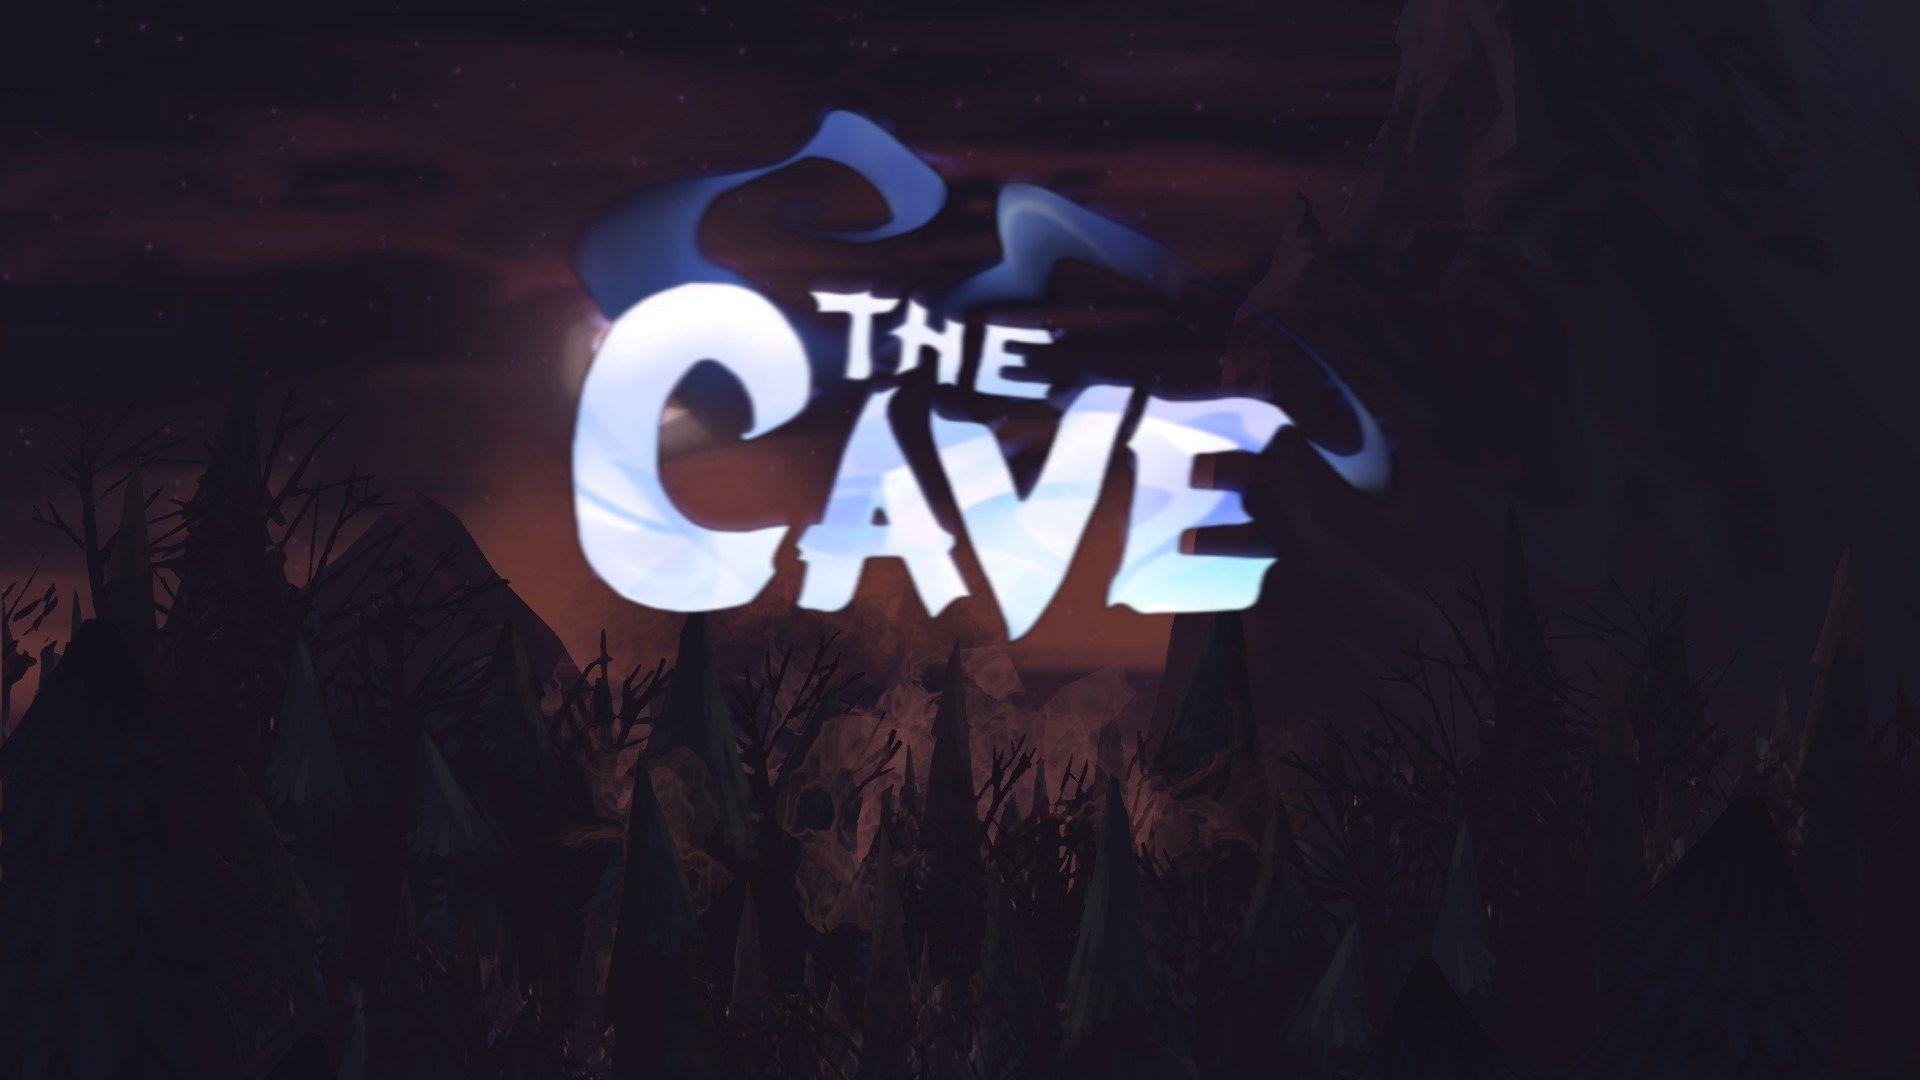 Cave Logo - The Cave logo